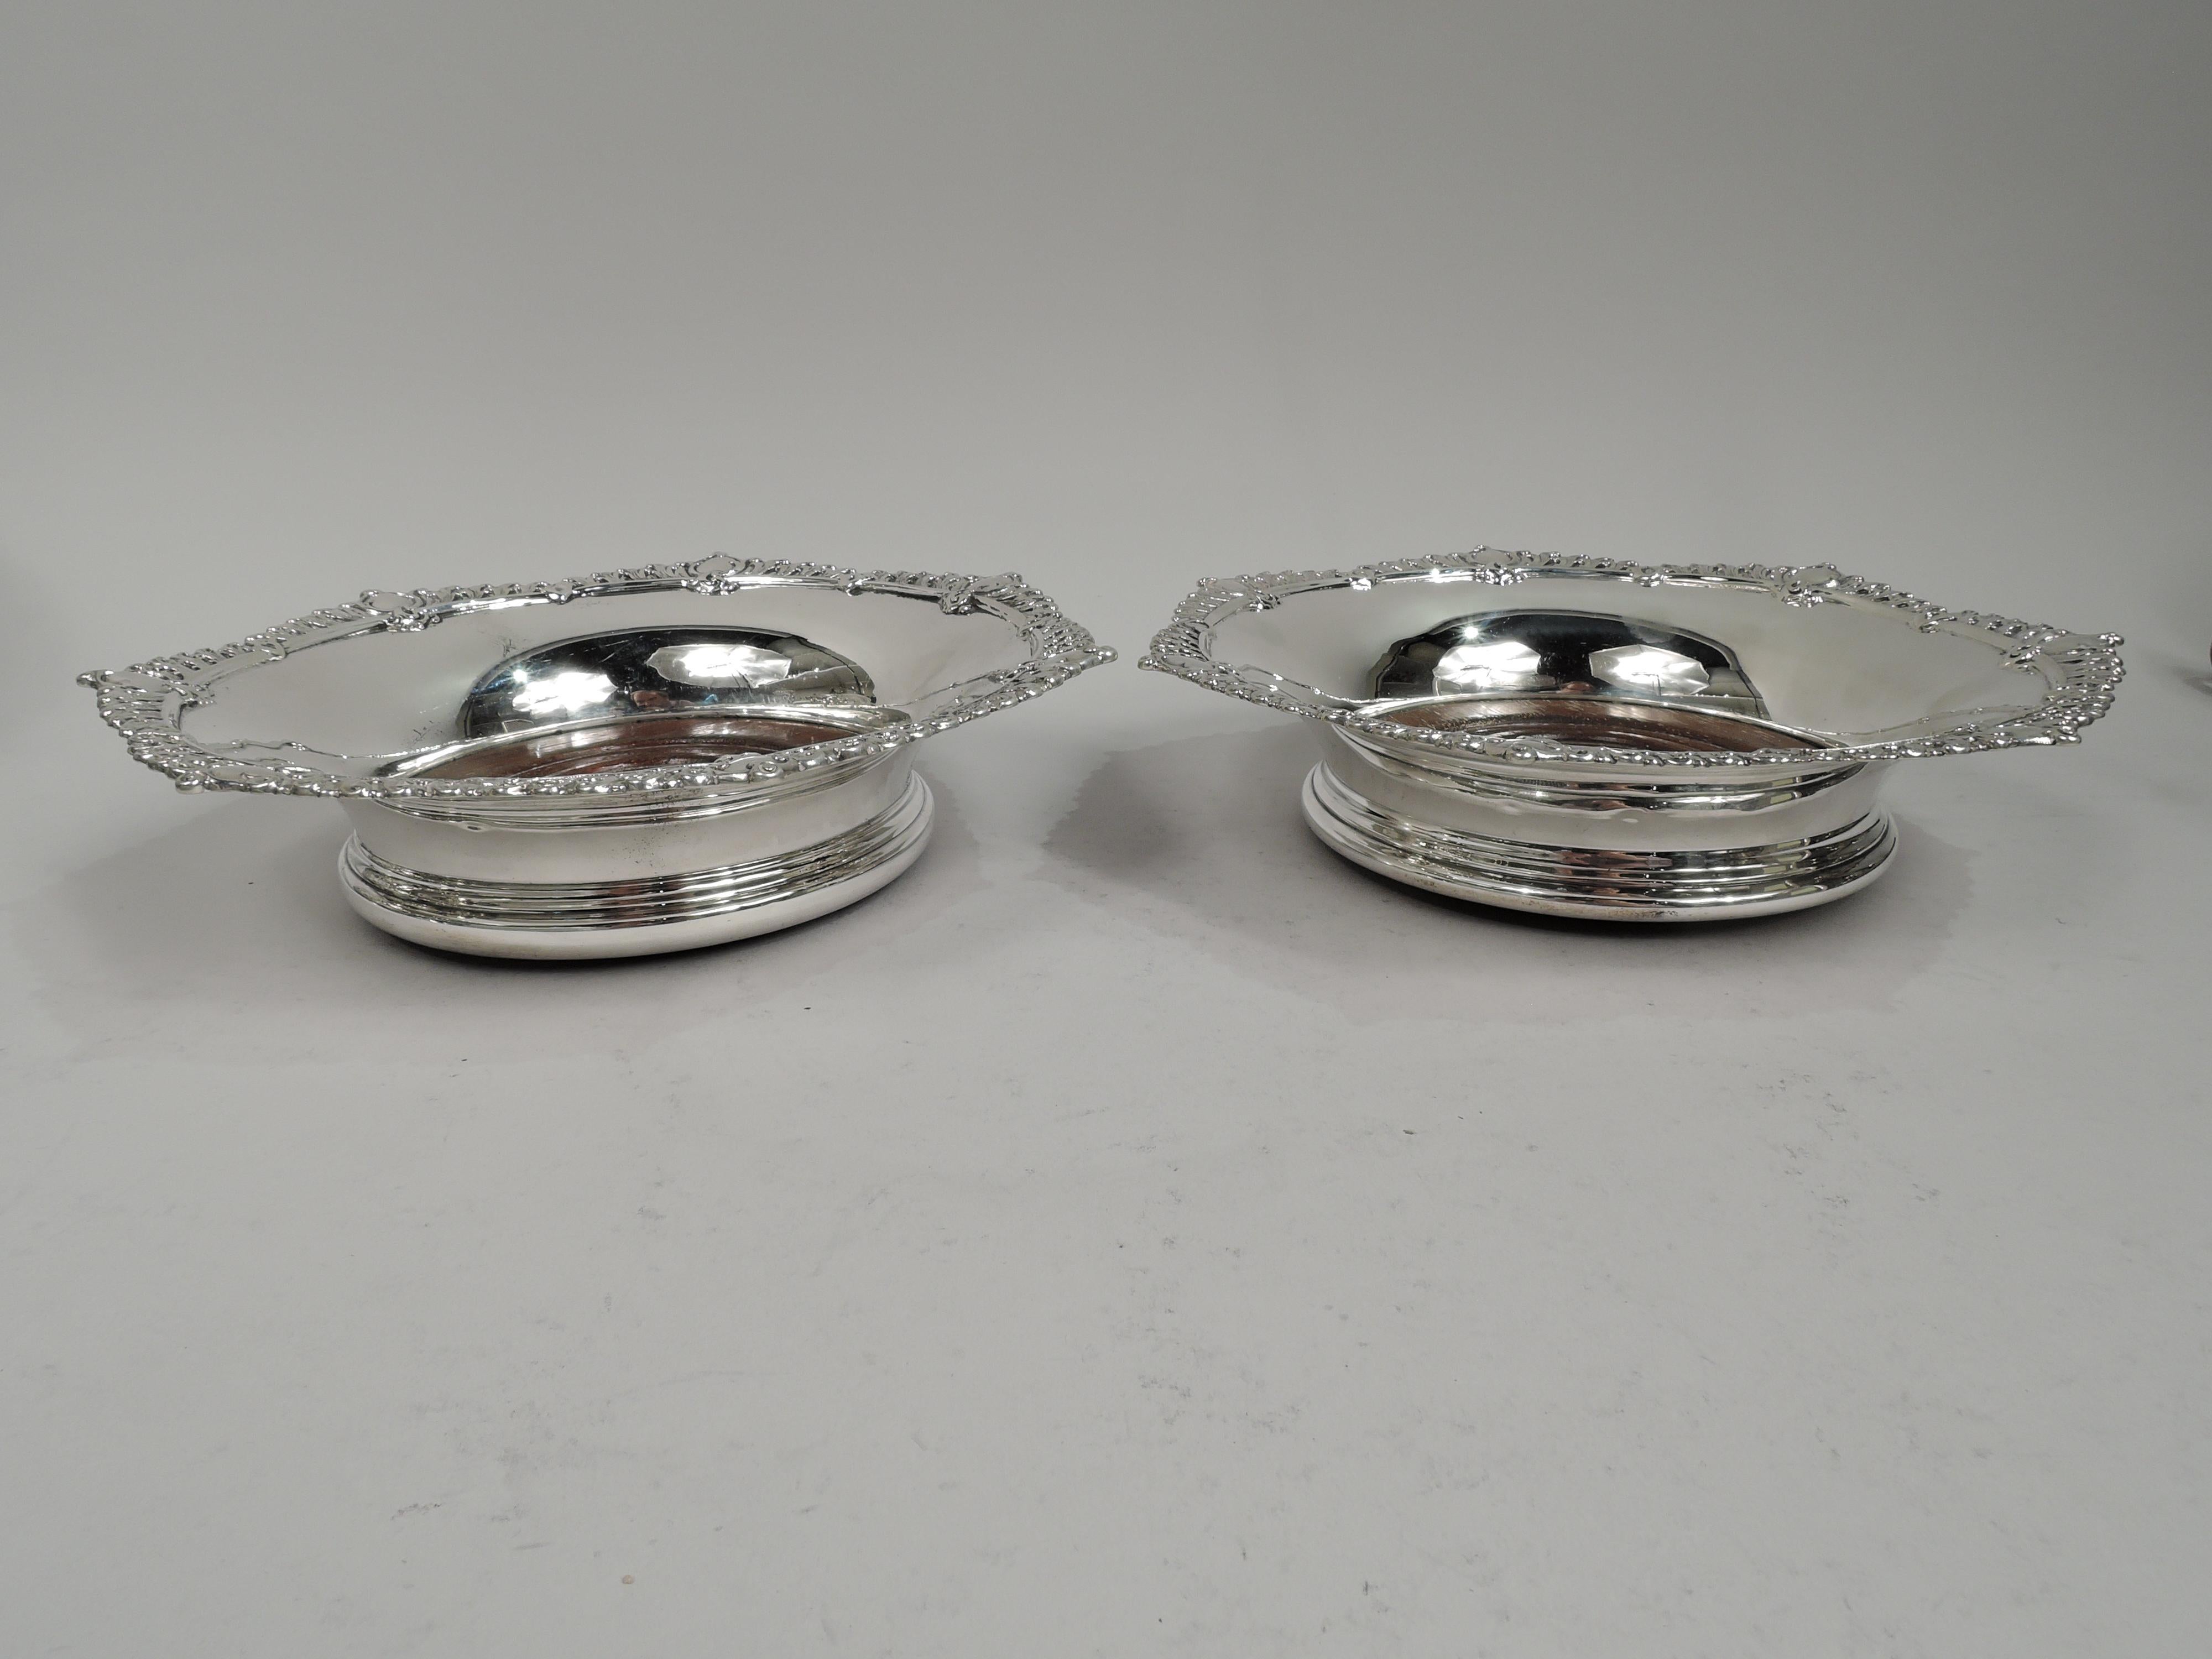 Pair of gift-quality American Edwardian Classical sterling silver wine bottle coasters, ca 1910. Retailed by Black, Starr & Frost in New York. Each: Tapering sides and spread and stepped base. Scrolling leaf rim interspersed with scrolled rondels.